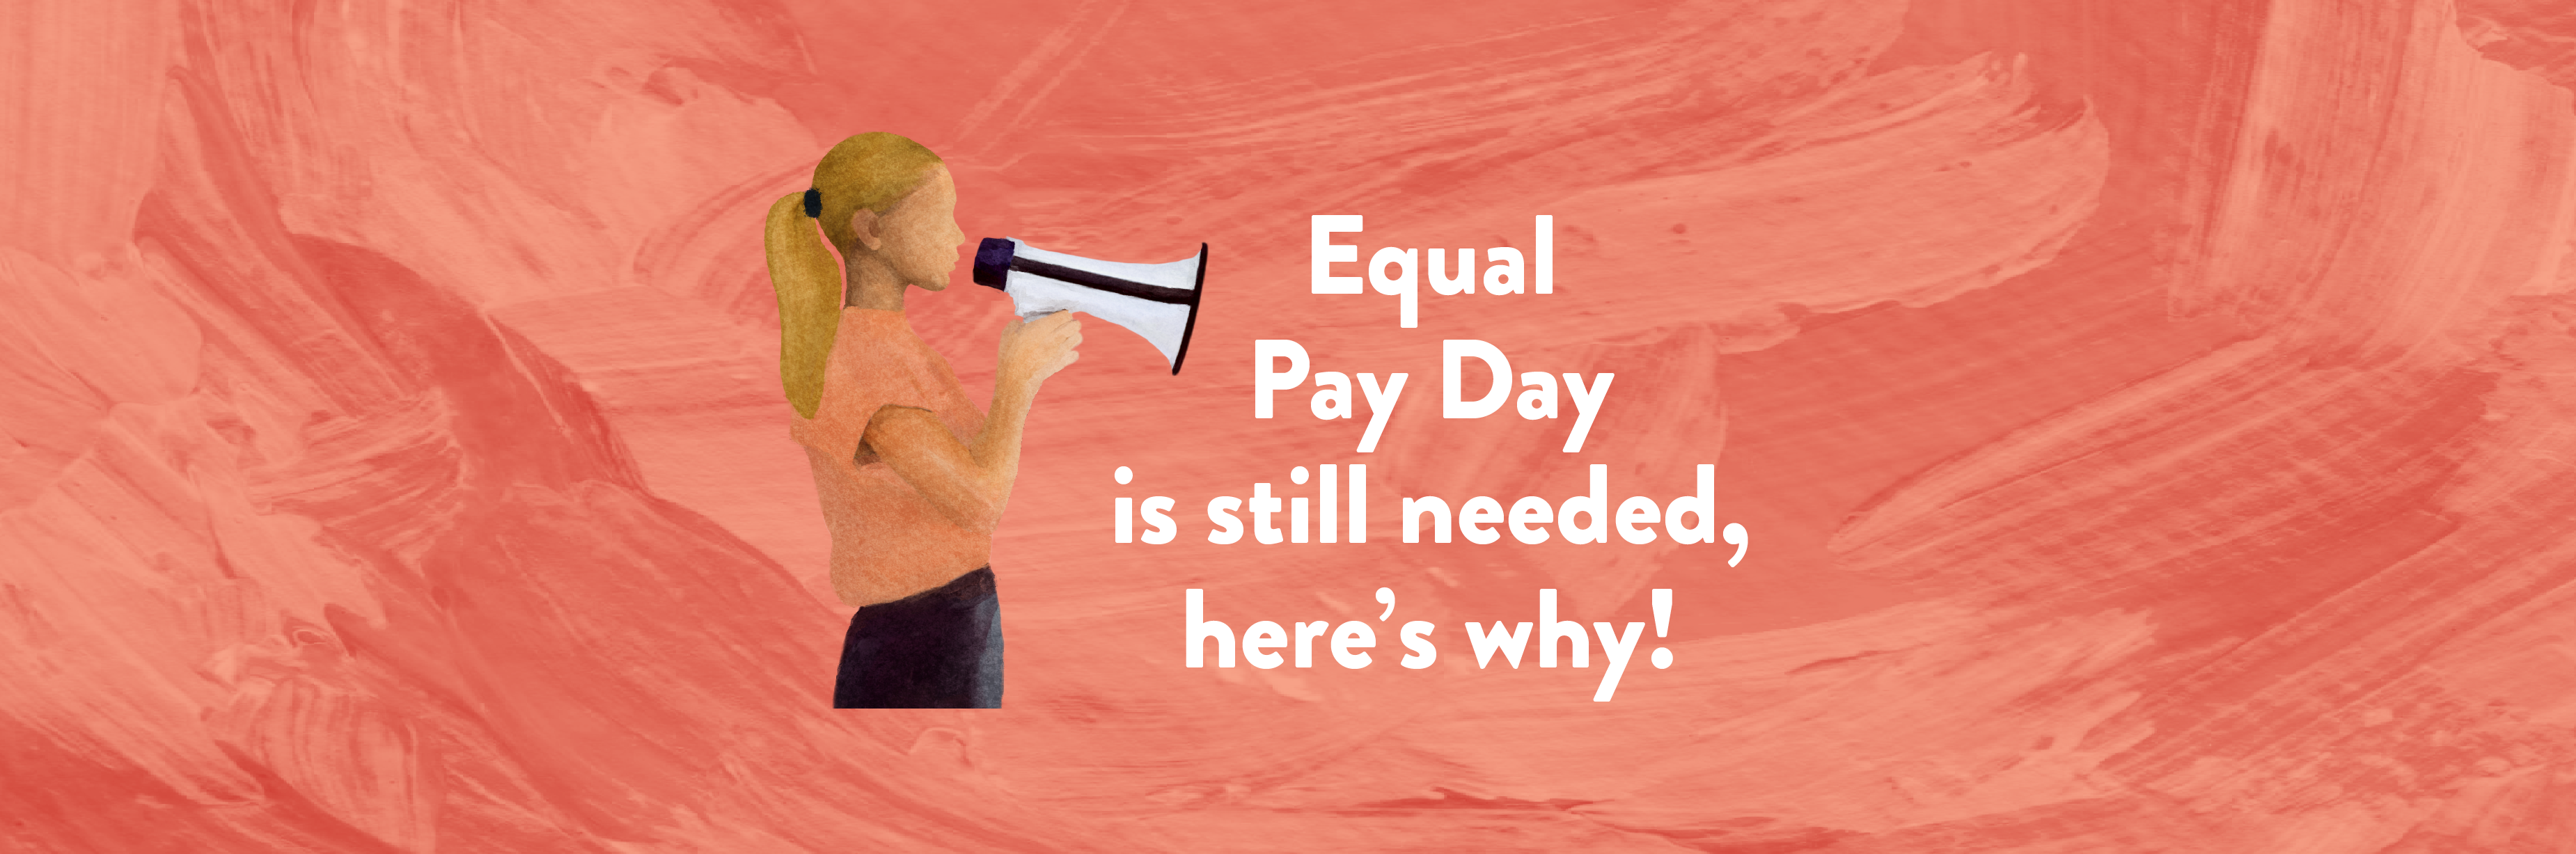 Equal Pay Day is still needed, here’s why! 